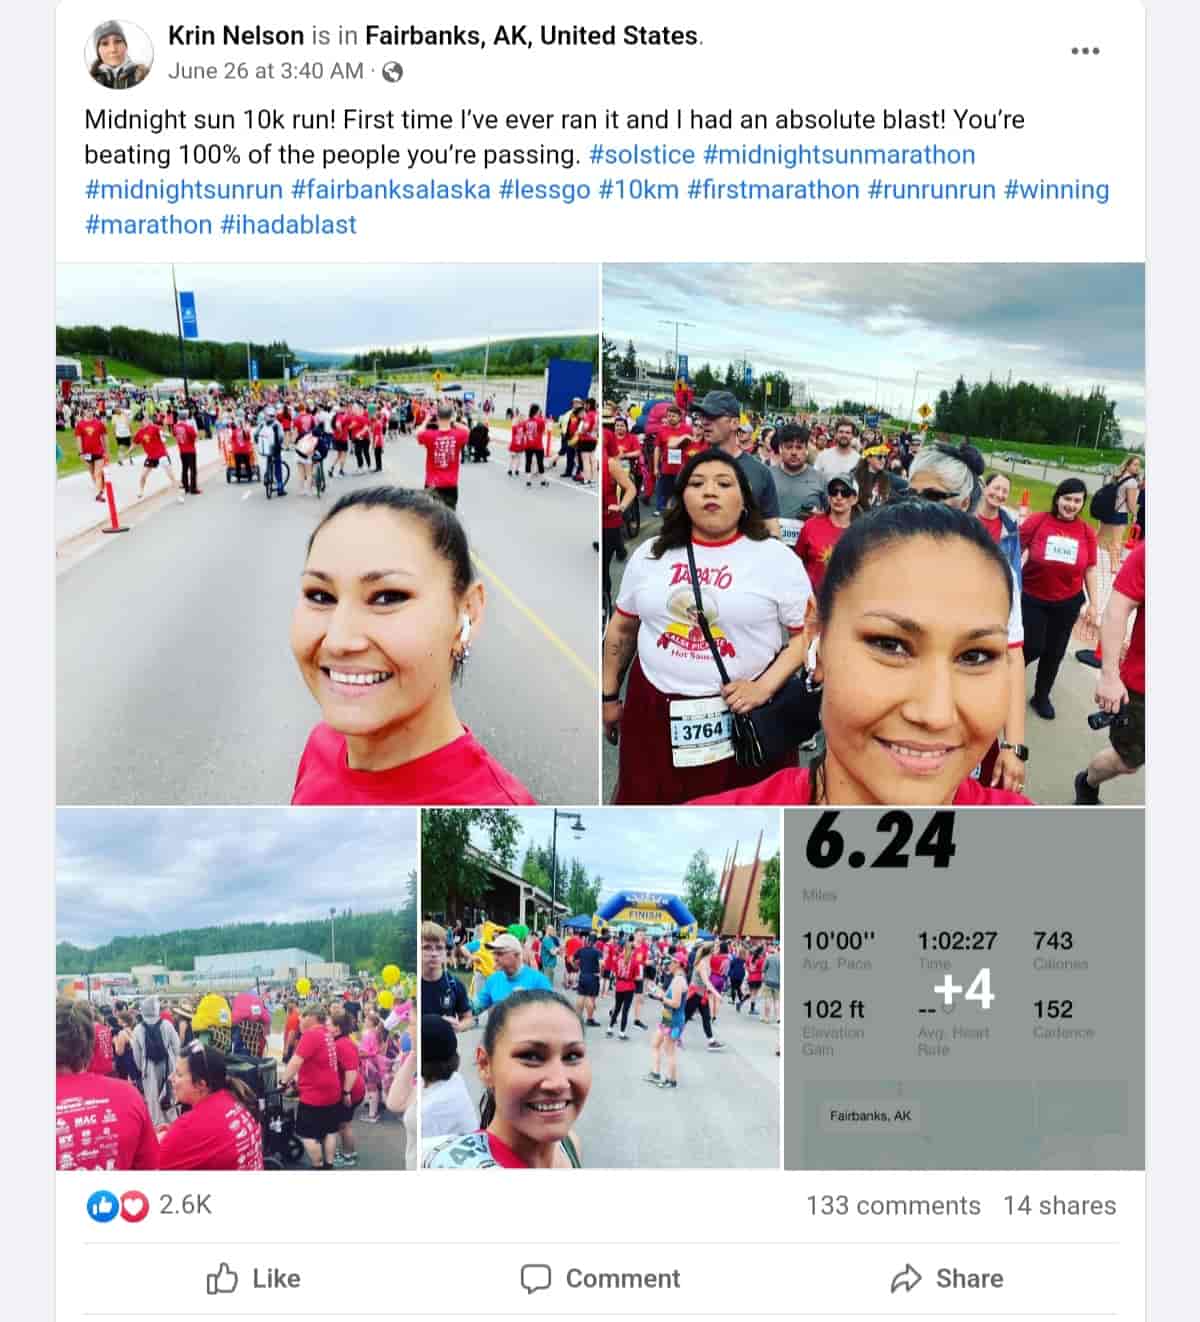 Image of Krin Nelson's Facebook post when she competed on a Marathon 